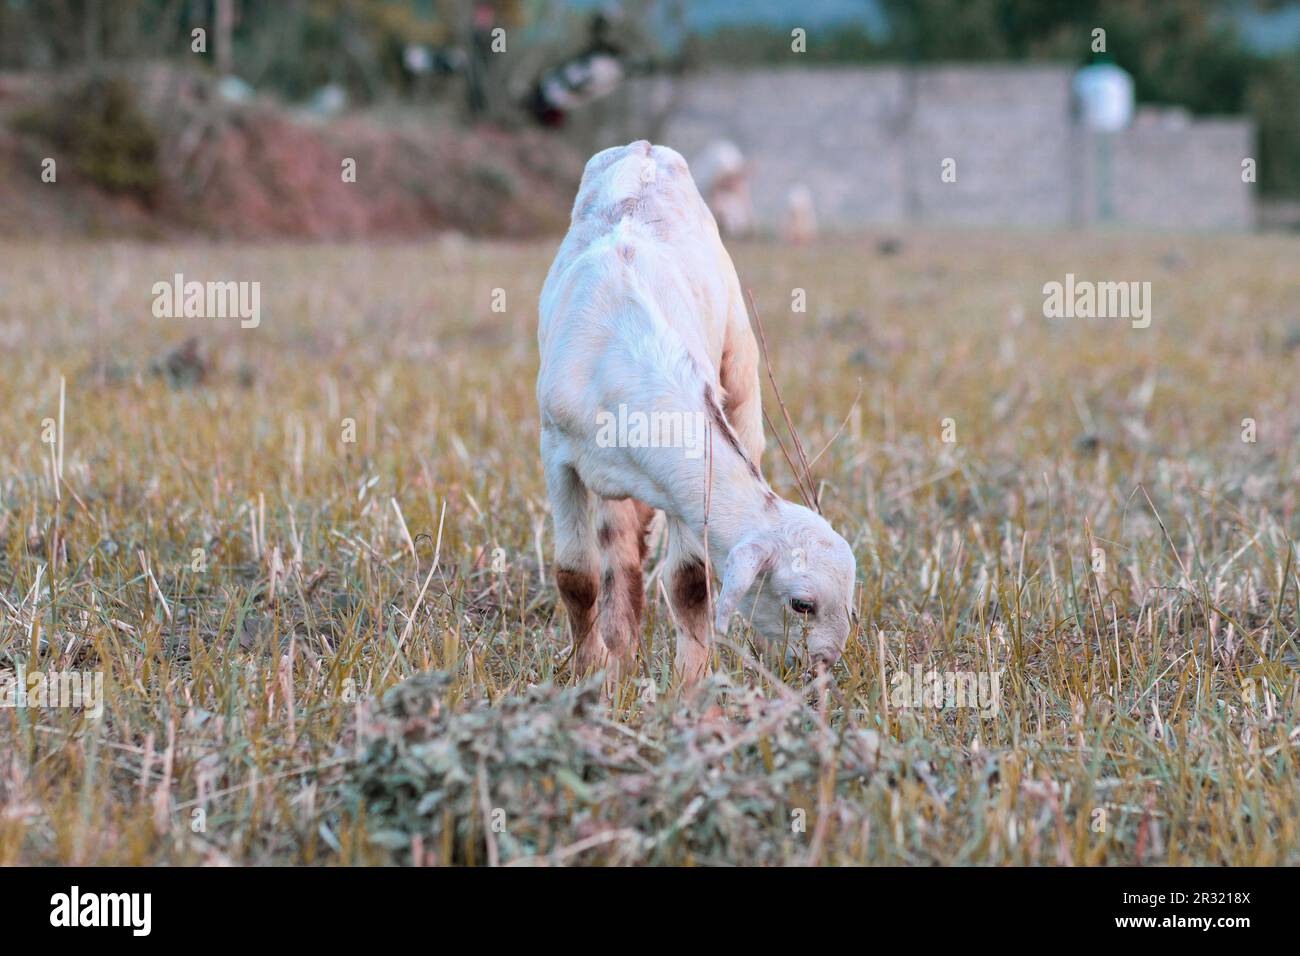 white goat baby eating the grass Stock Photo